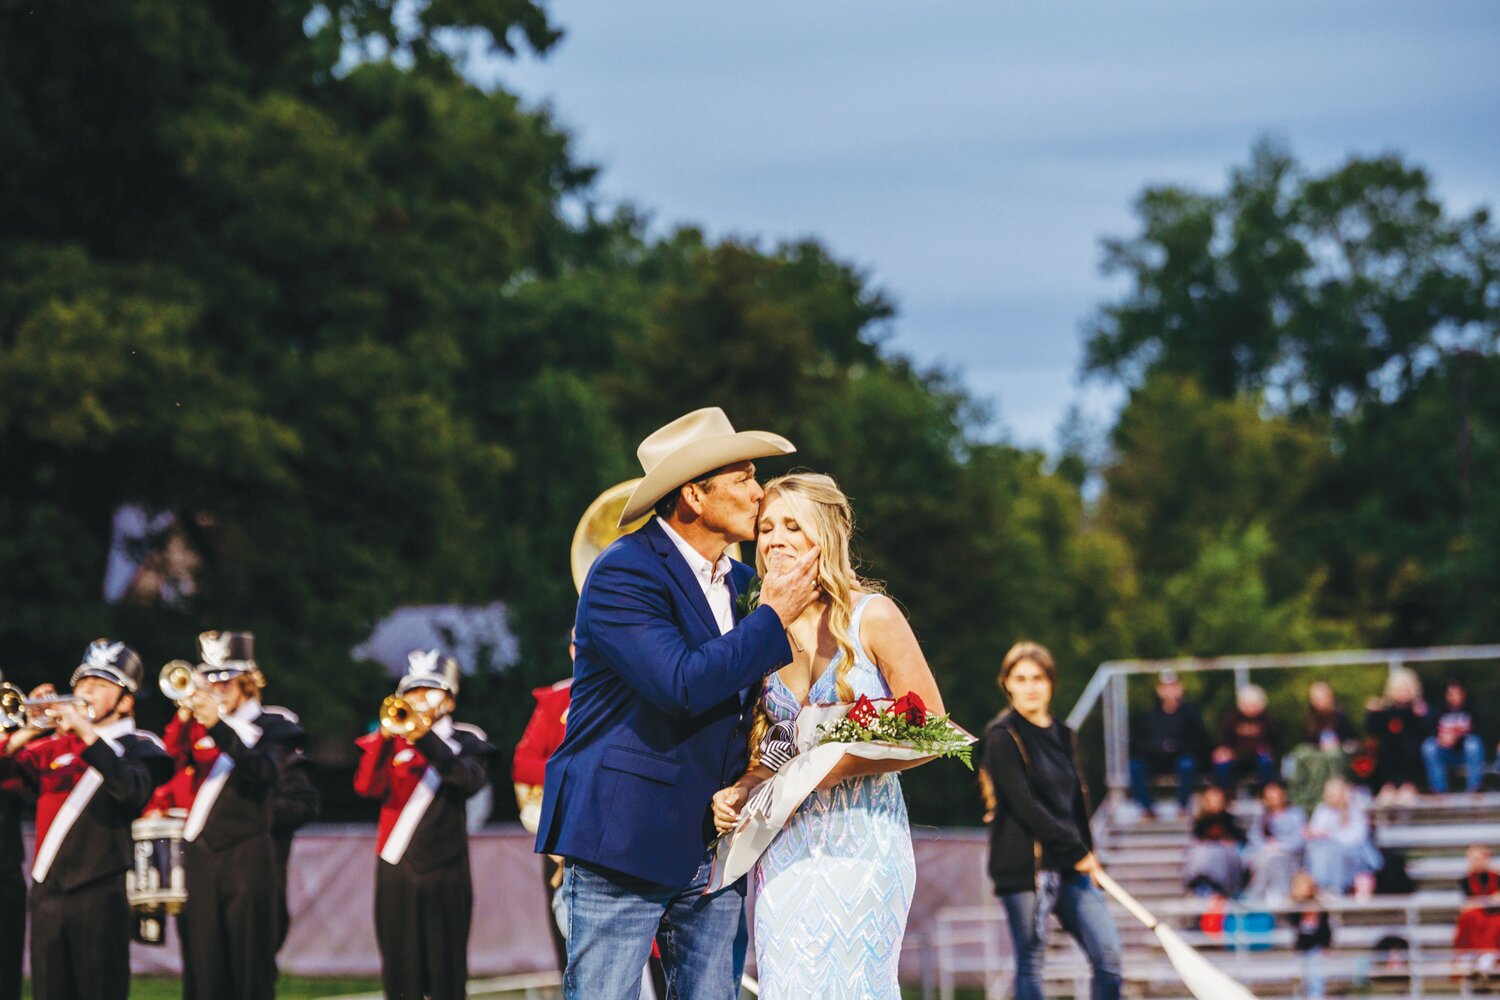 Huntsville Senior, Faith Thomas, was named the 2023 Huntsville High School Homecoming Queen. She was escorted by her father, Danny Thomas.